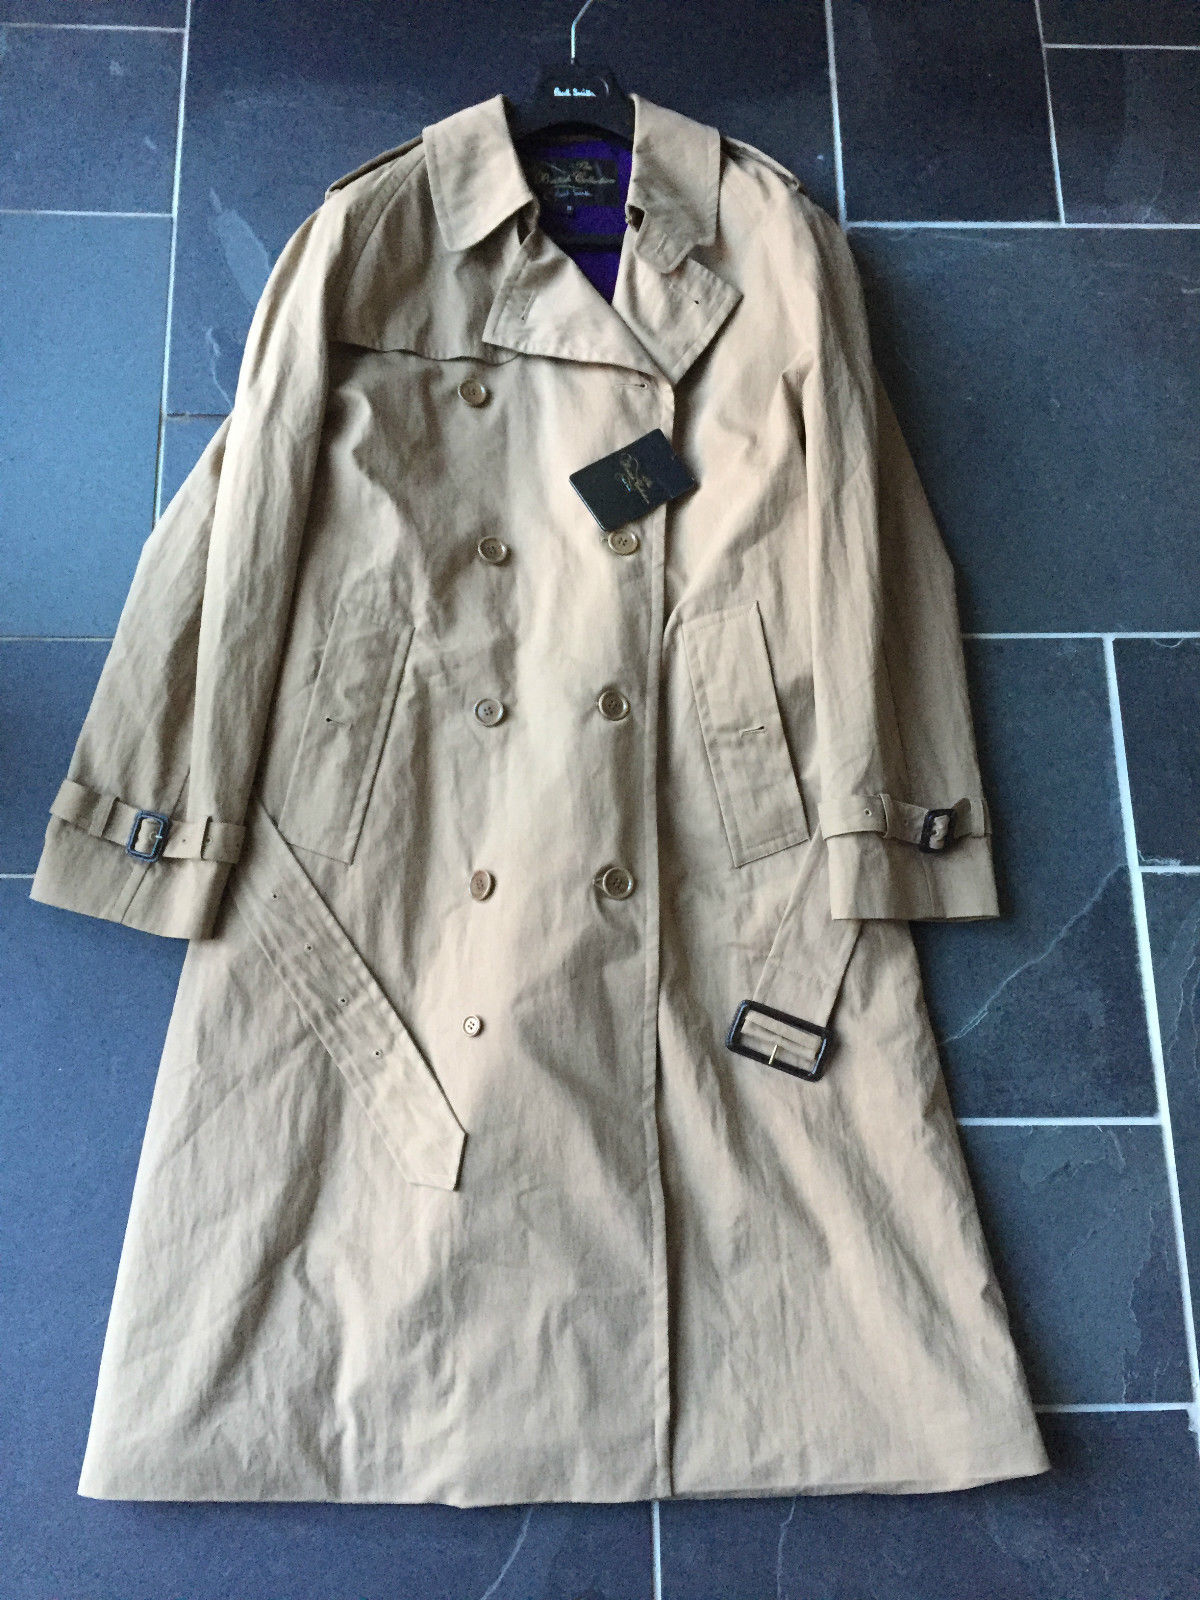 PAUL SMITH BRITISH COLLECTION Beige Long Trench Coat - Size M | eBay